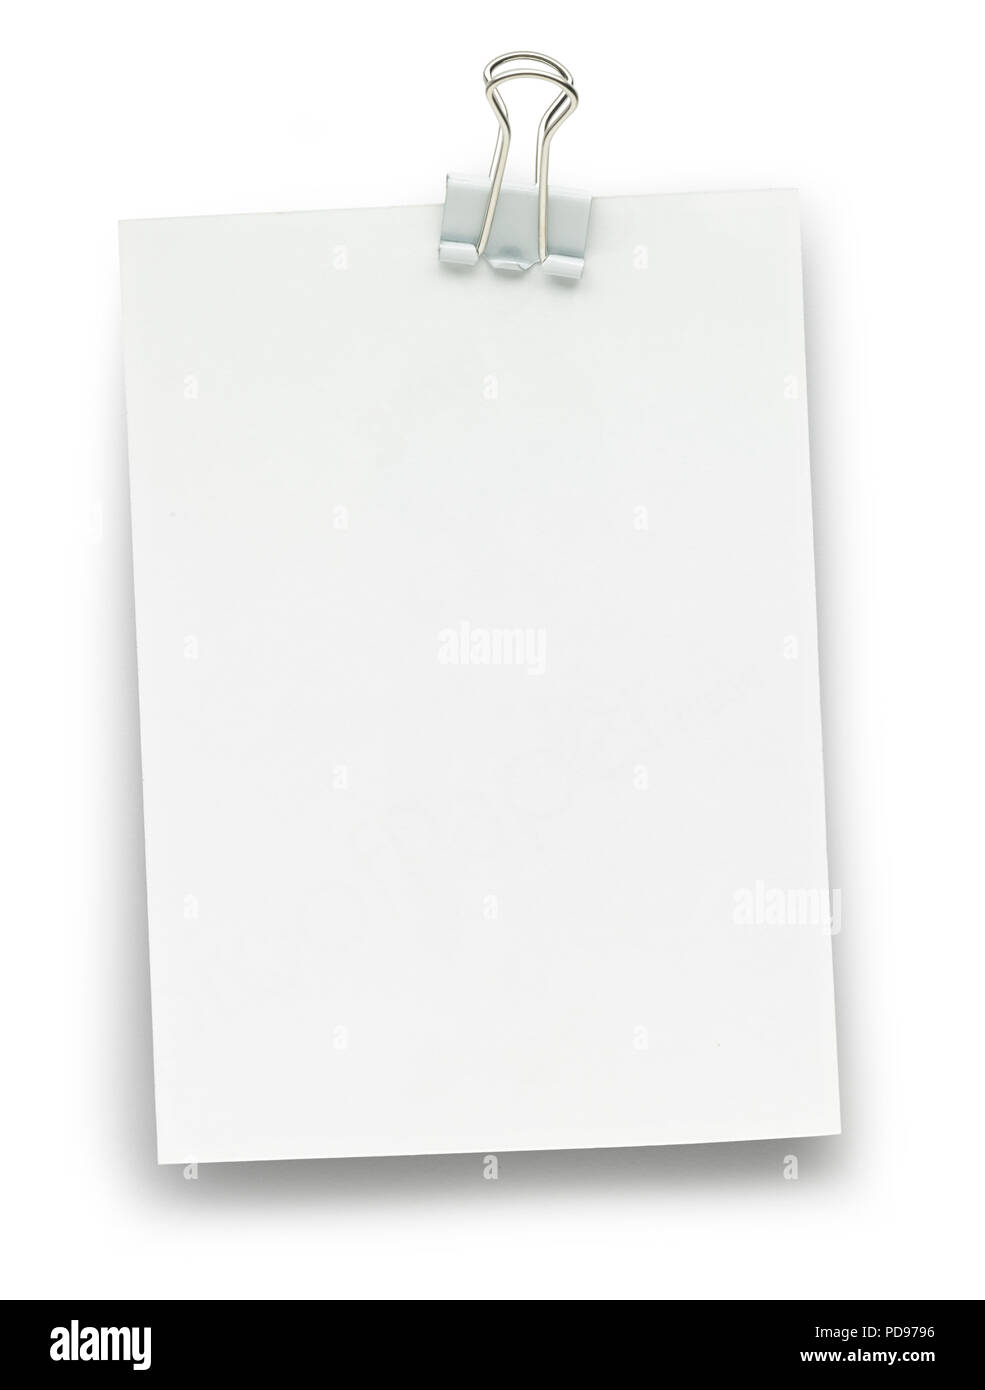 White paper pinned to background Stock Photo